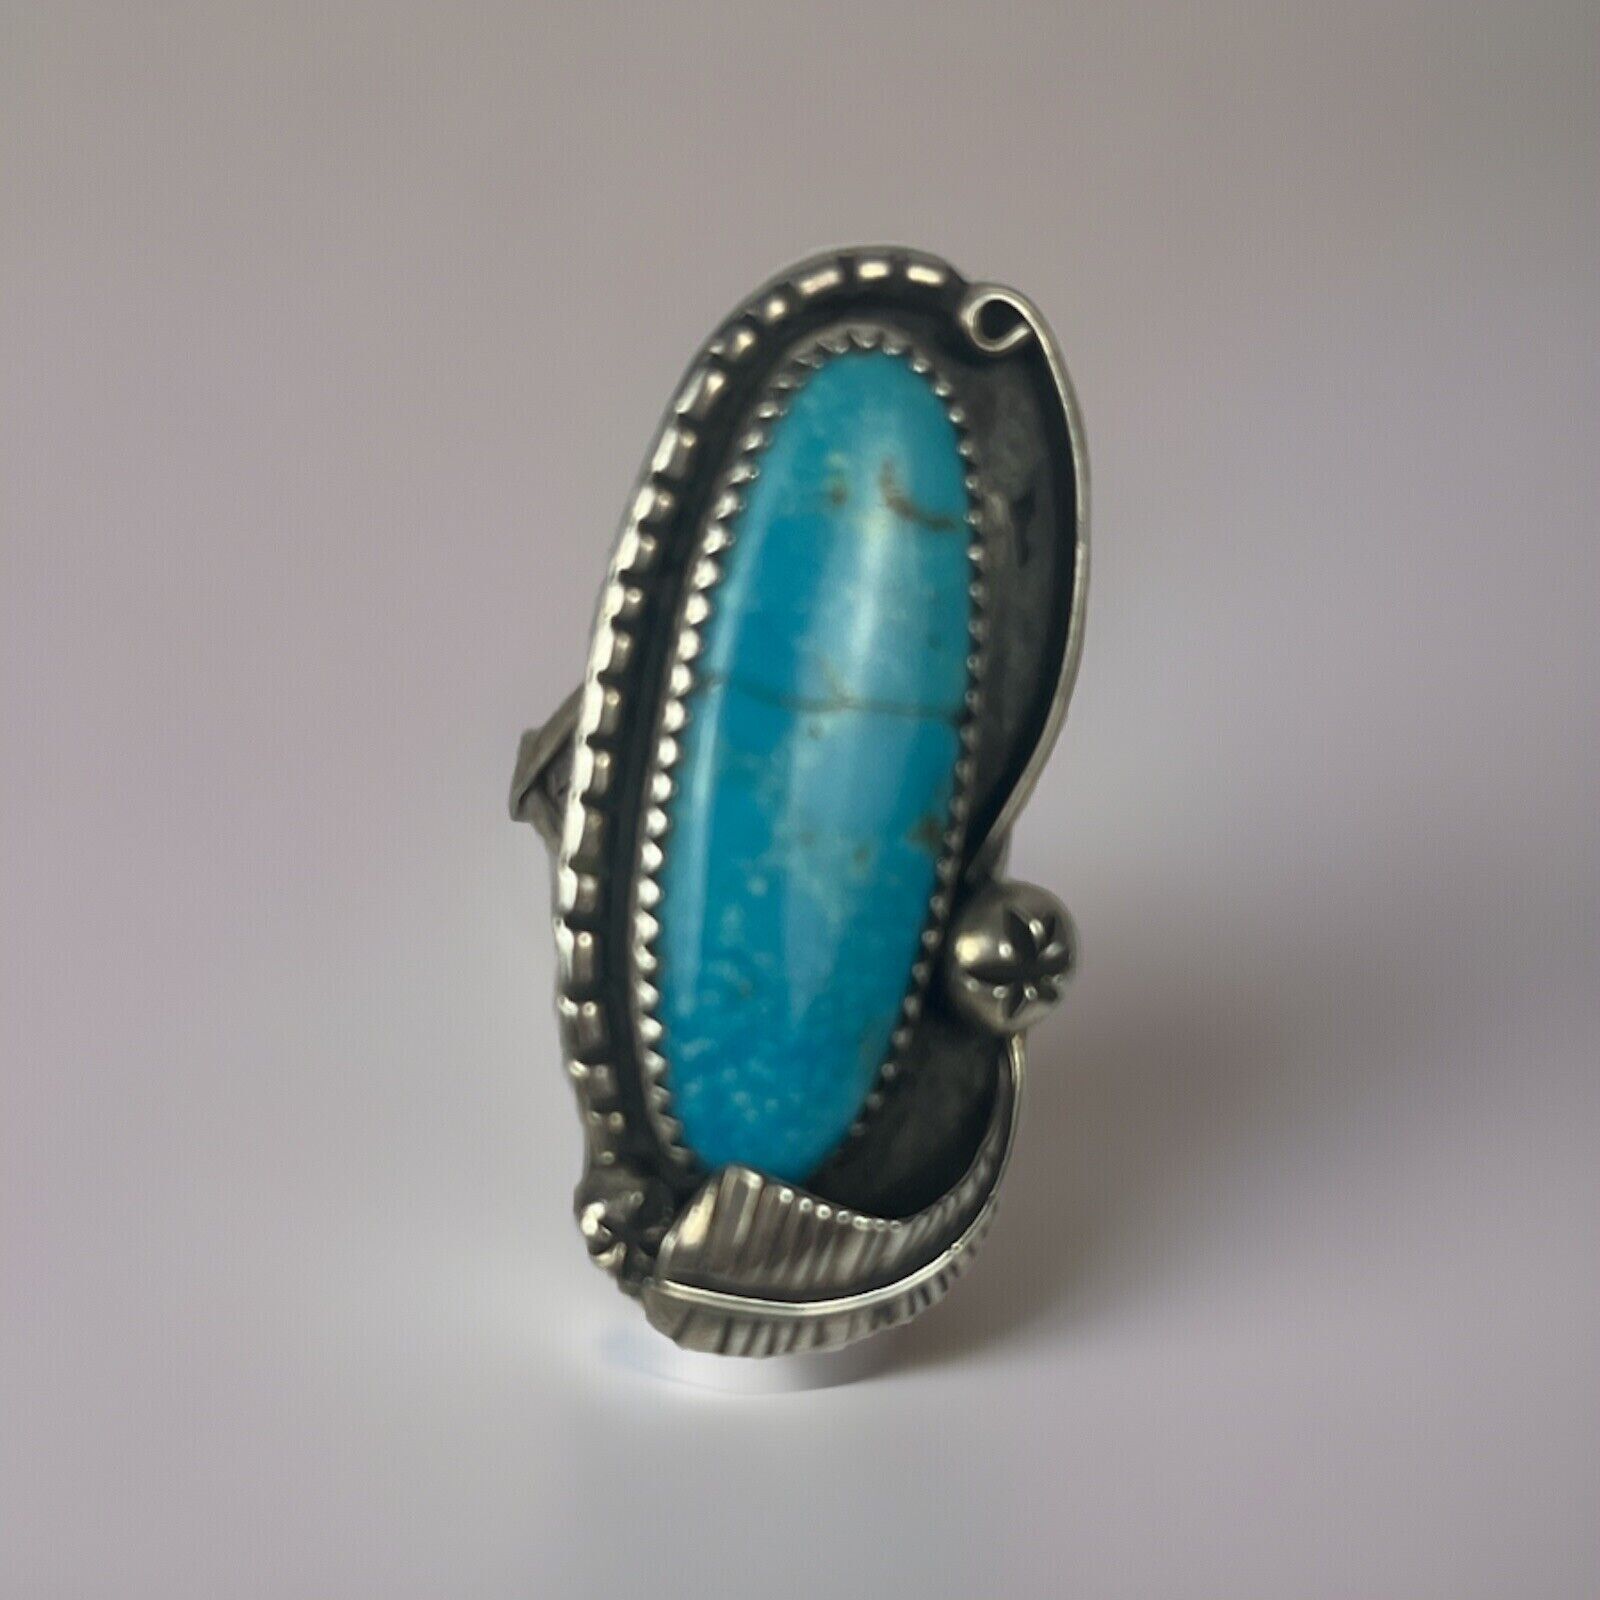 Vintage Native American Navajo Sterling Silver Navajo Turquoise Ring Size 7